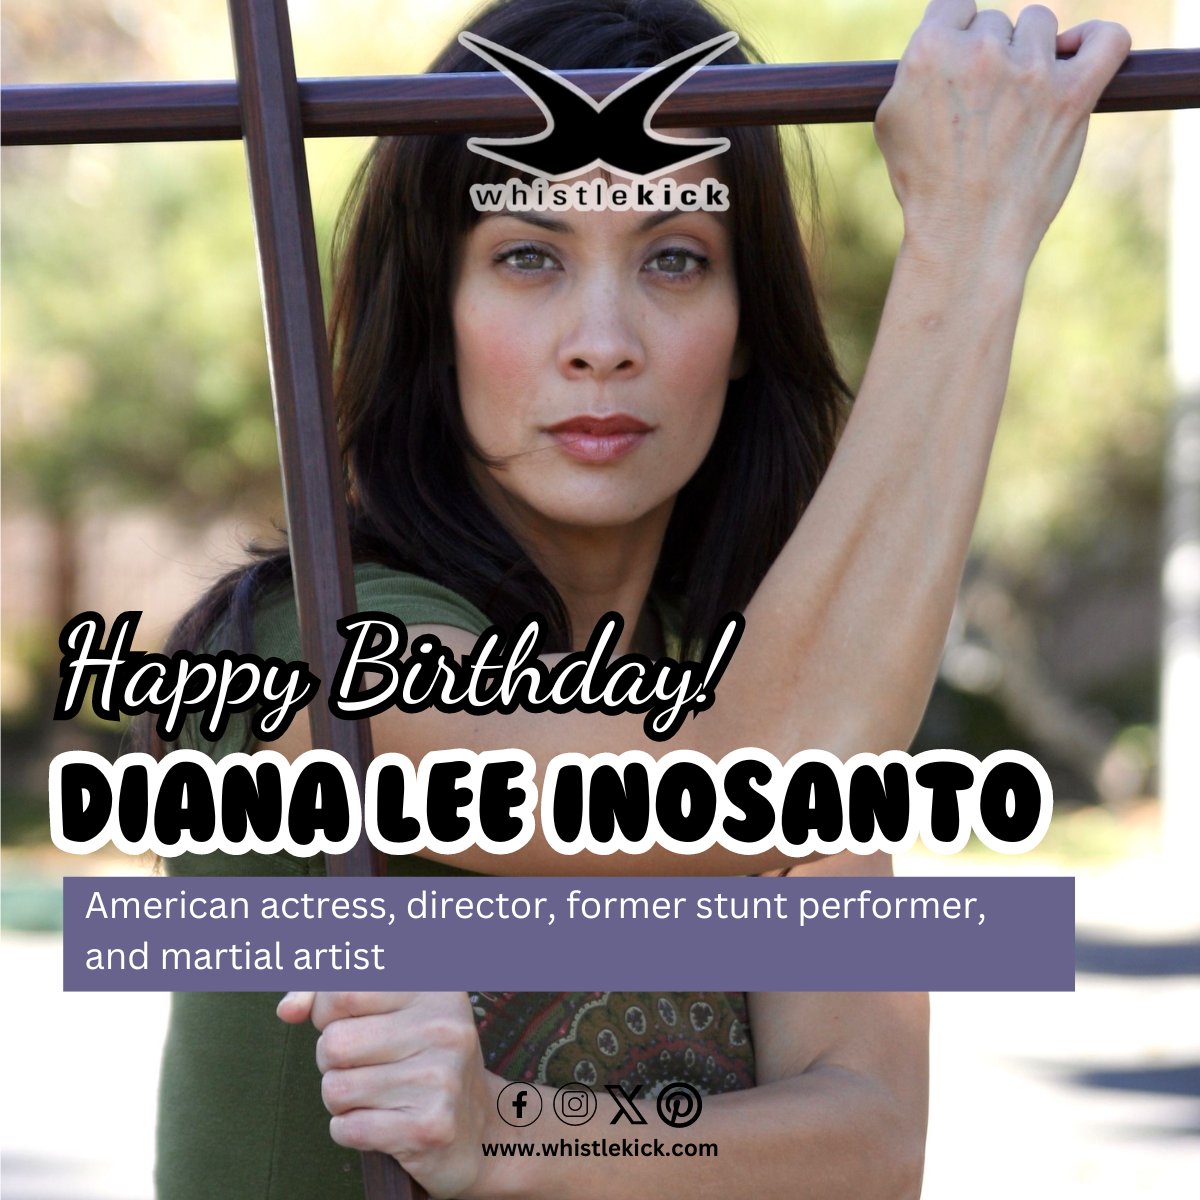 Happy Birthday, Diana Lee Inosanto! 🎉 

Your incredible talent and dedication continue to inspire us all. Wishing you a day filled with joy and celebration! 🌟🥳

#HappyBirthday #Inspiration #MartialArtsLegend #actress #martialartist #director #dianaleeinosanto #whistlekick